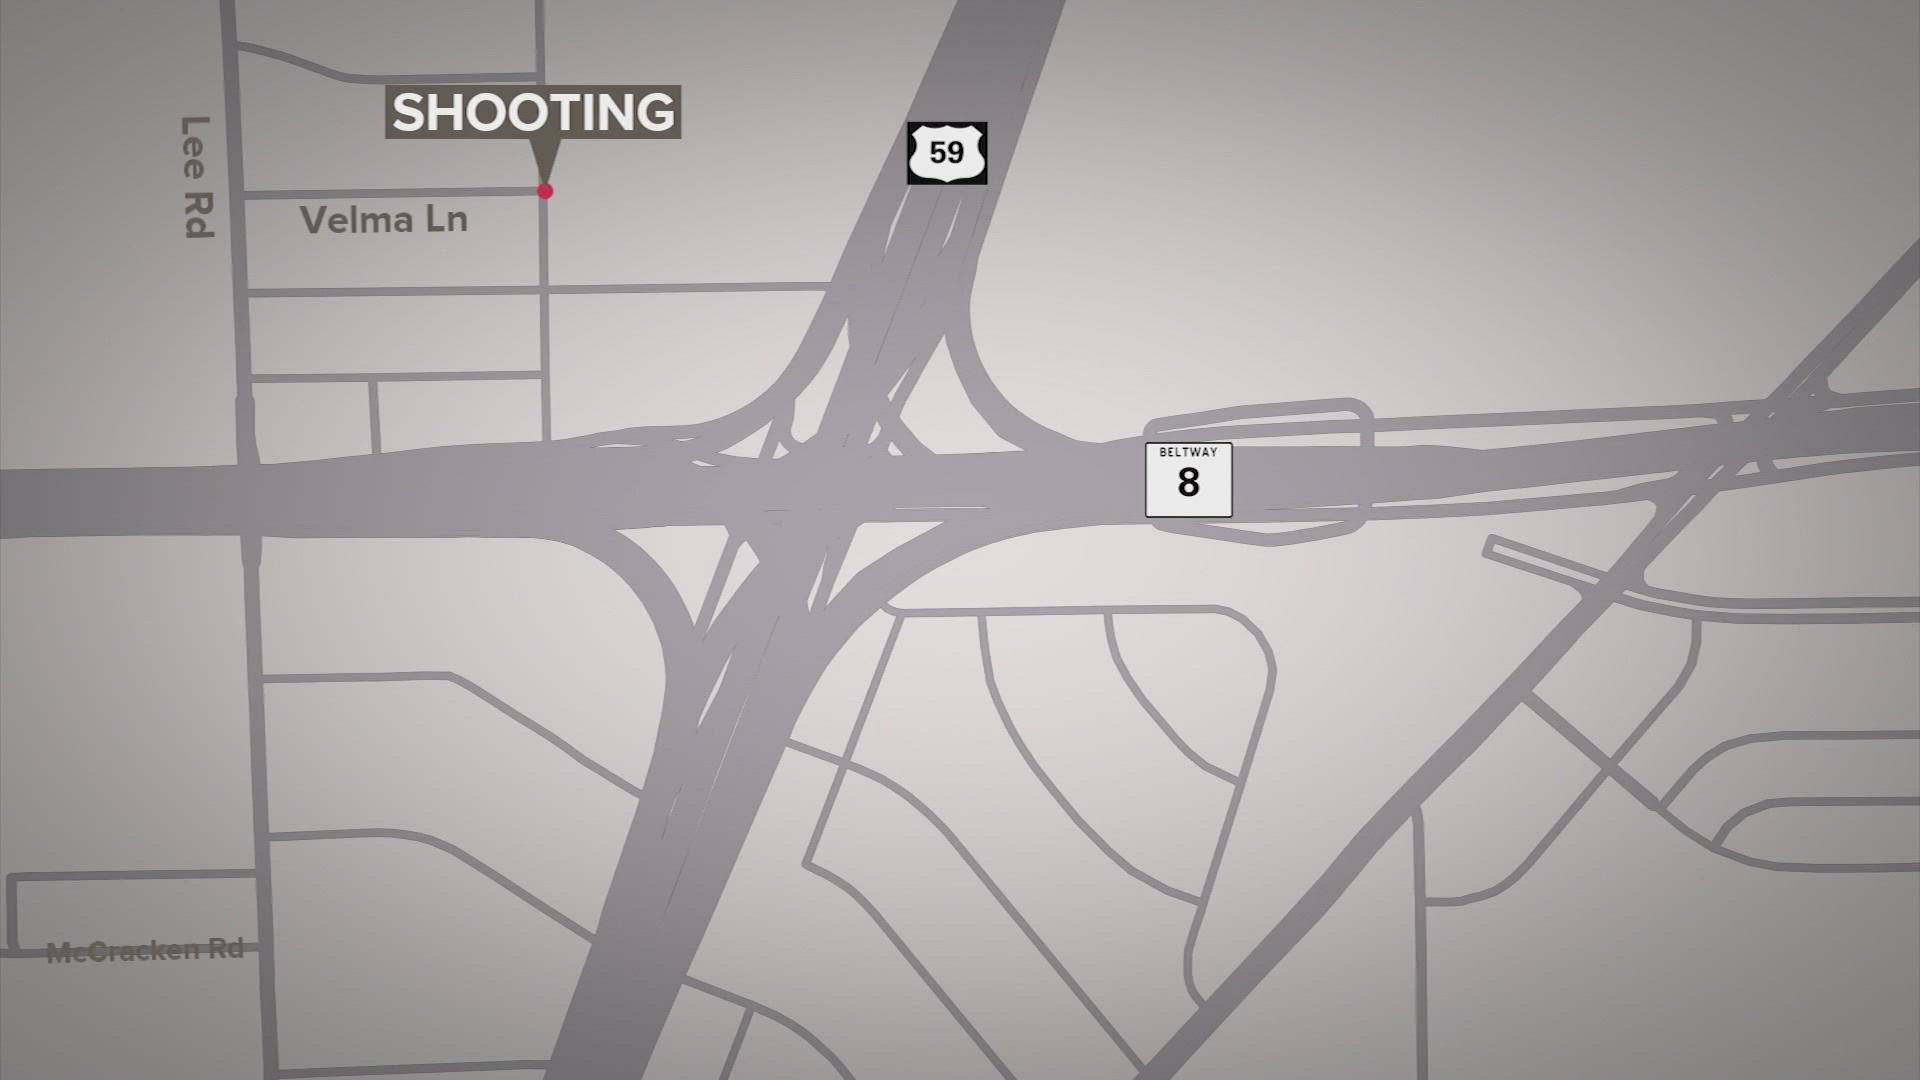 The shooting happened on Velma Lane, which is near where I-69 and Beltway 8 meet.